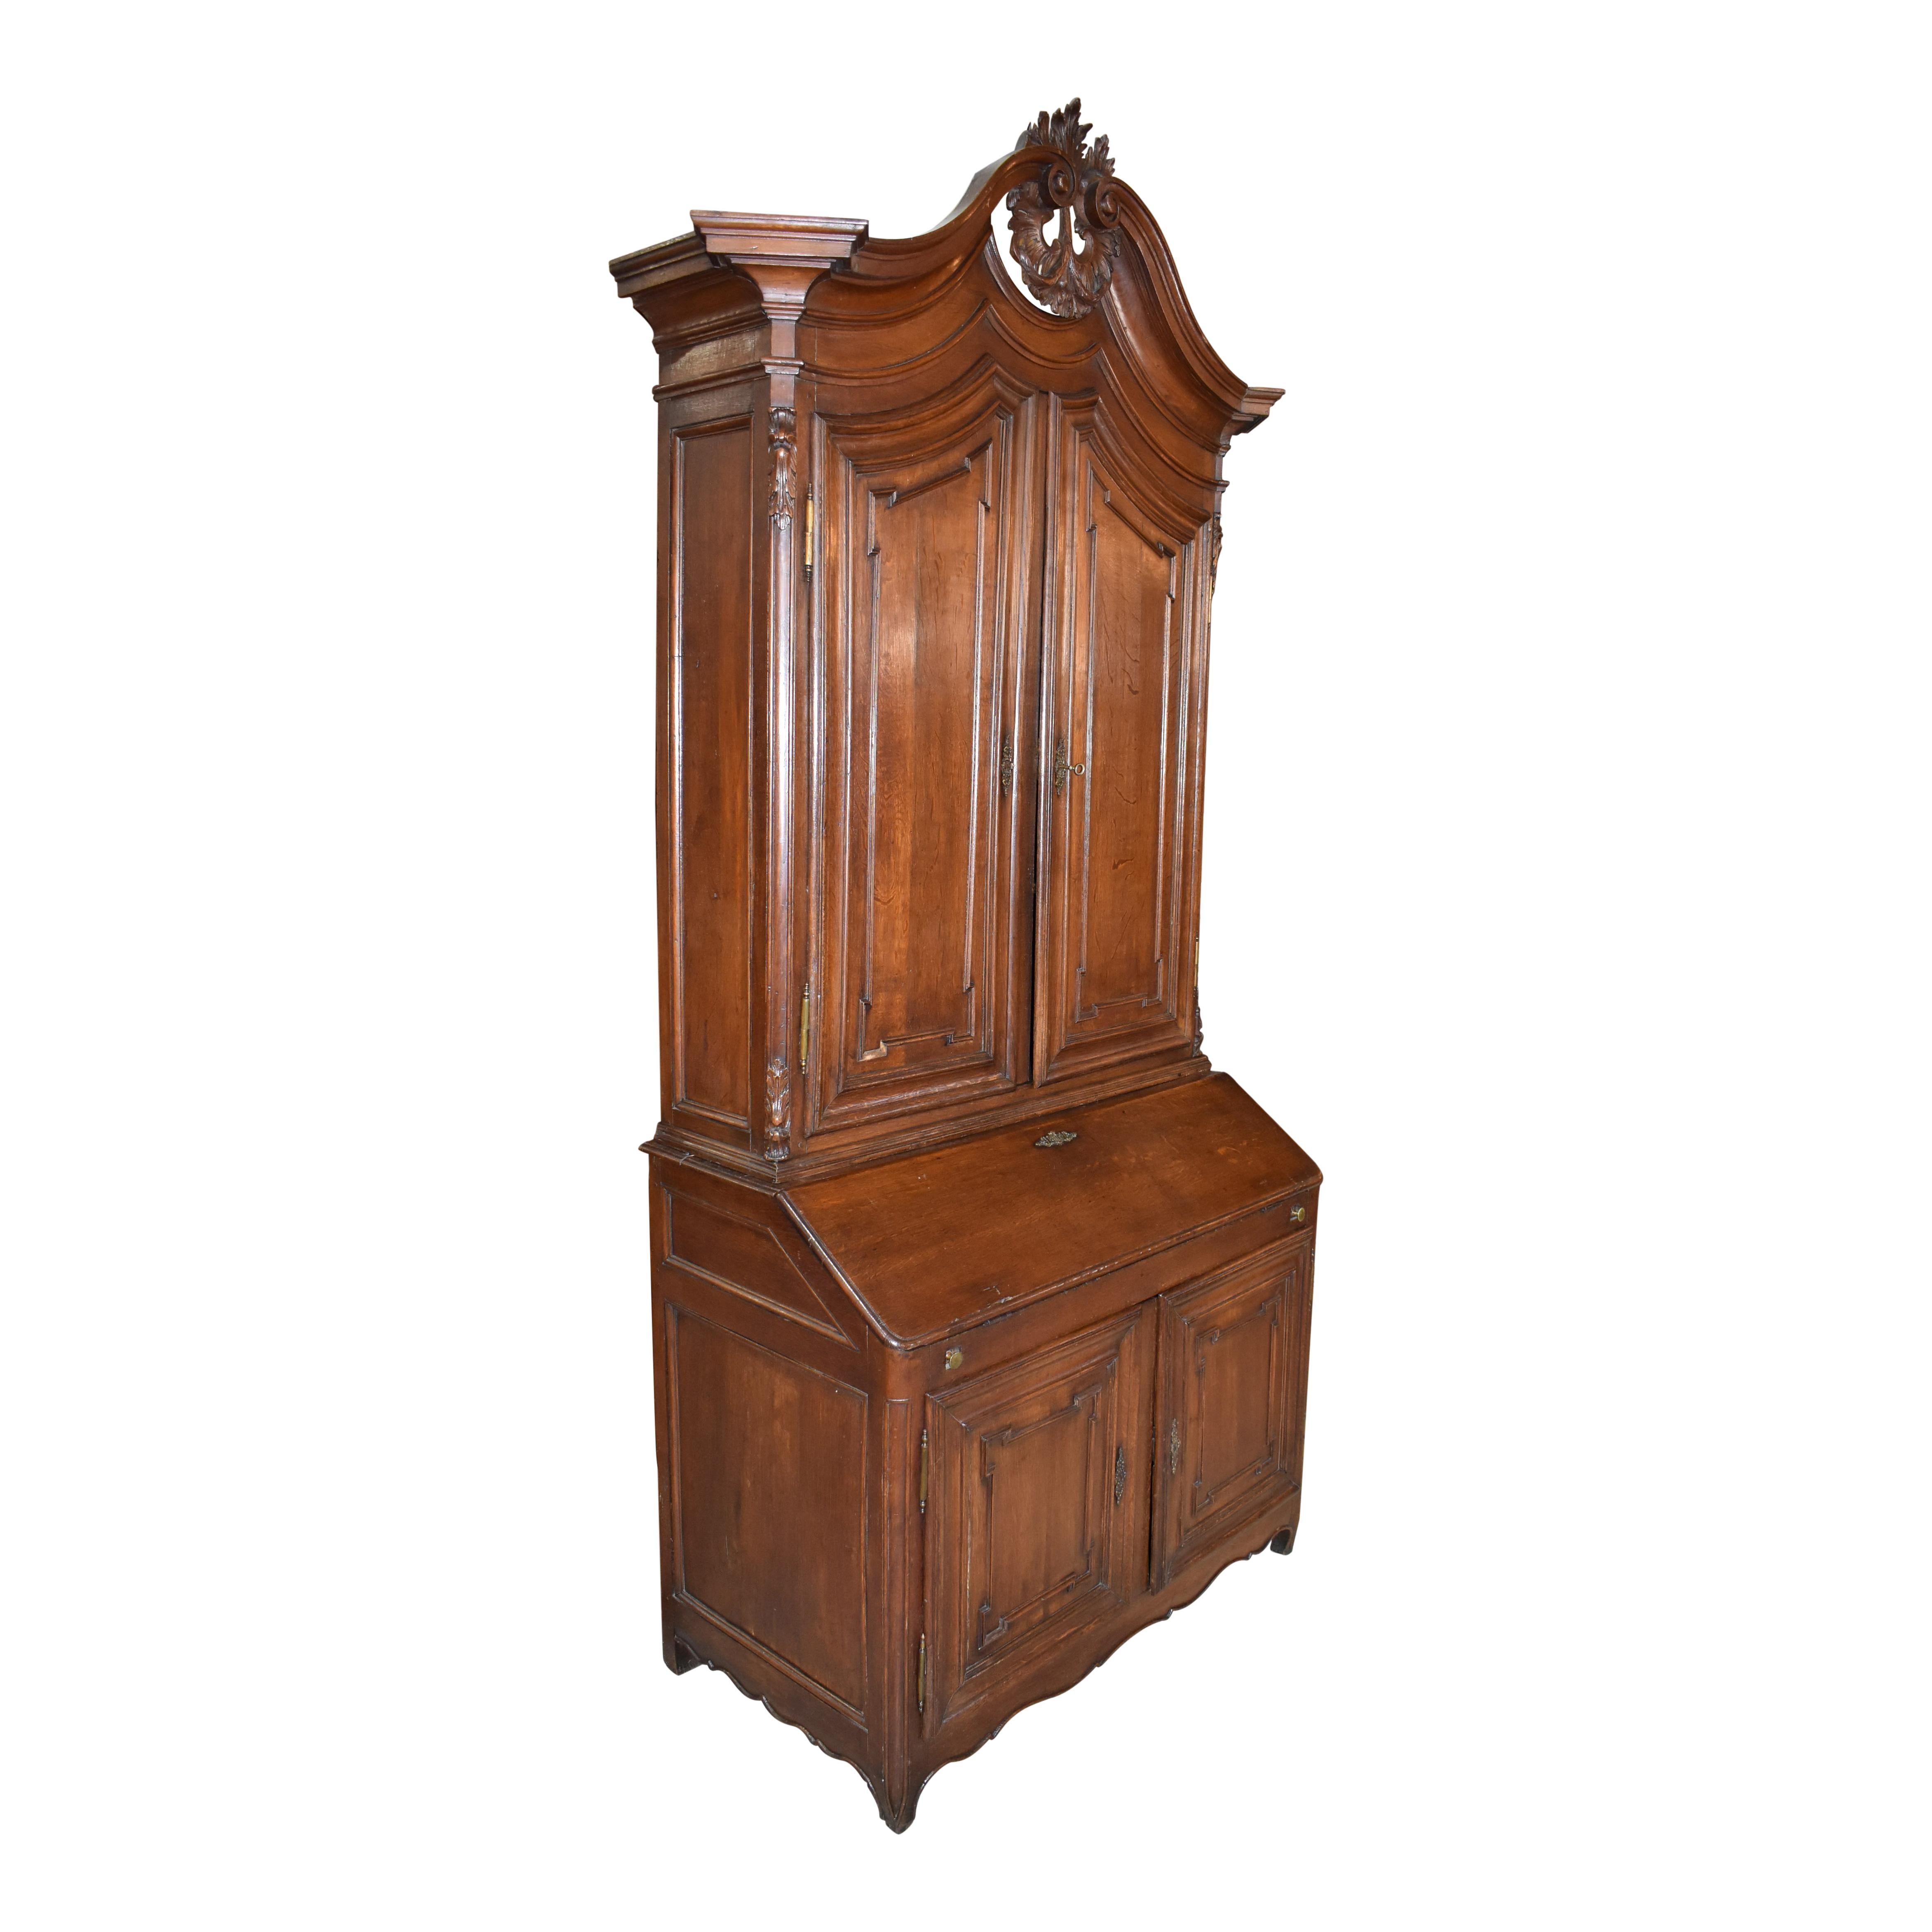 This substantial, mid-19th century secretary features solid oak construction with a beautiful patina. A molded arched cornice with a swan neck pediment crowns the piece and showcases a delicate circular display of fanned leaves to form a stunning